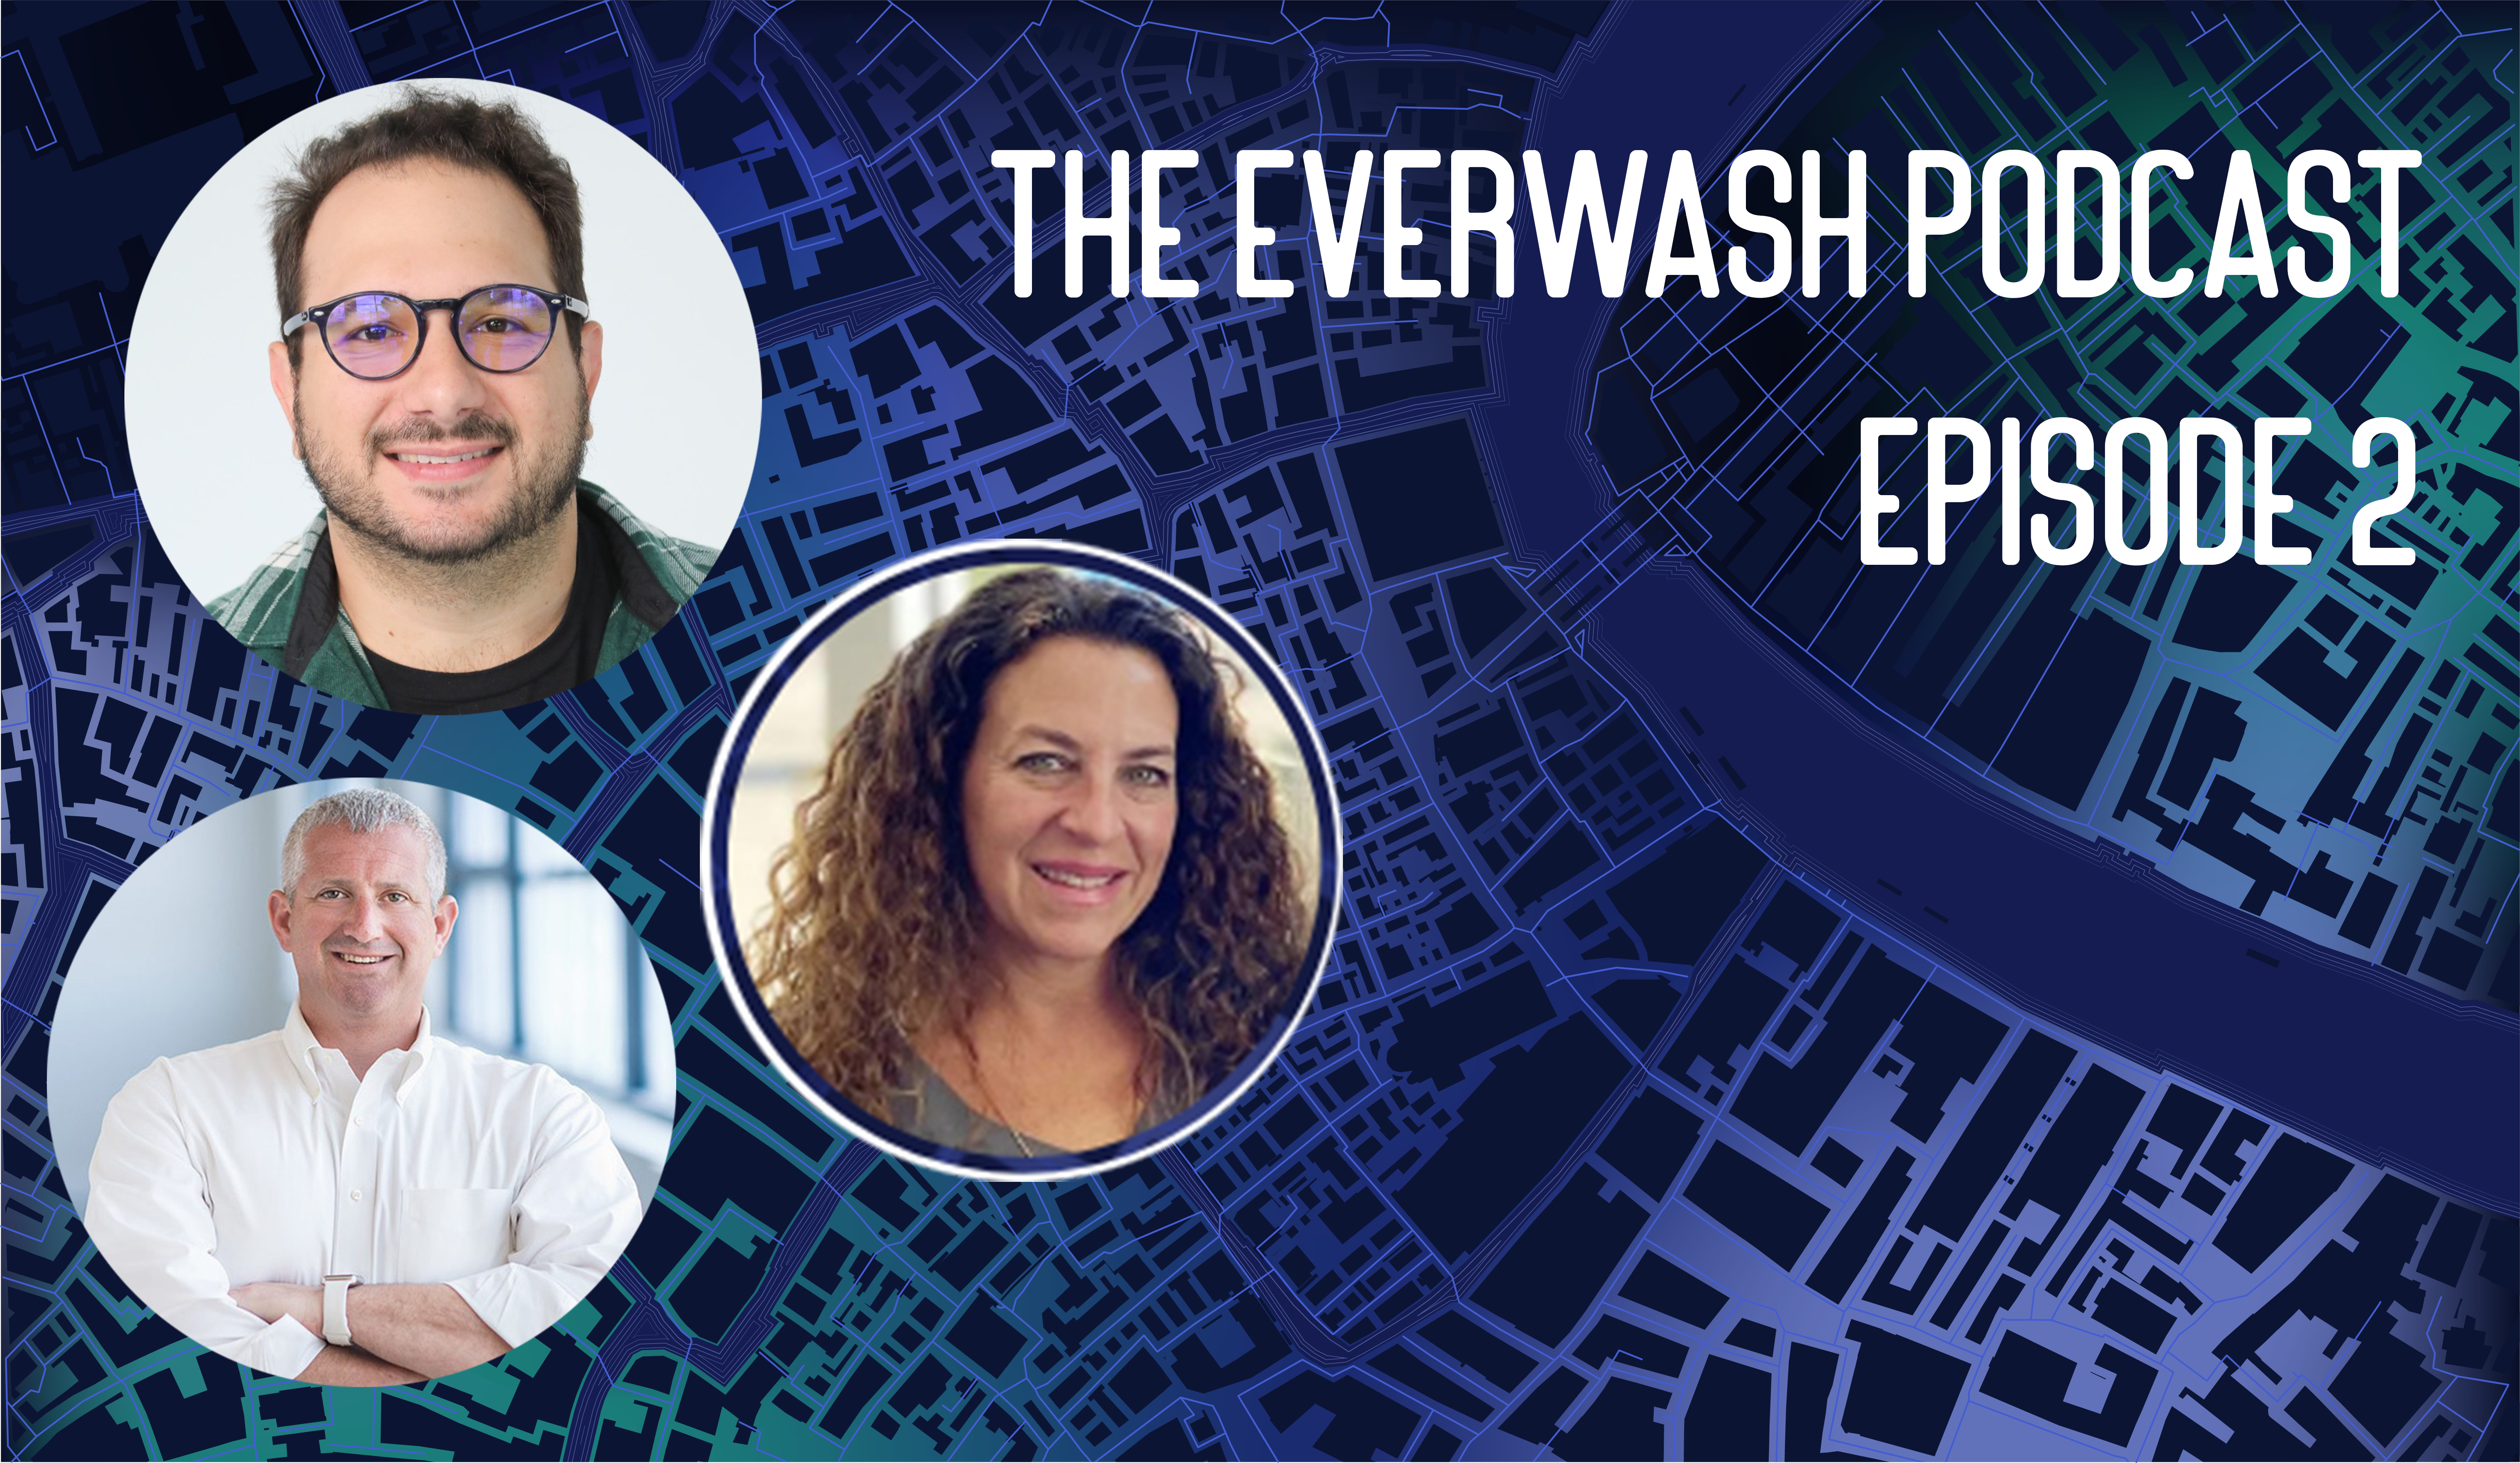 Episode 2 of the EverWash Podcast